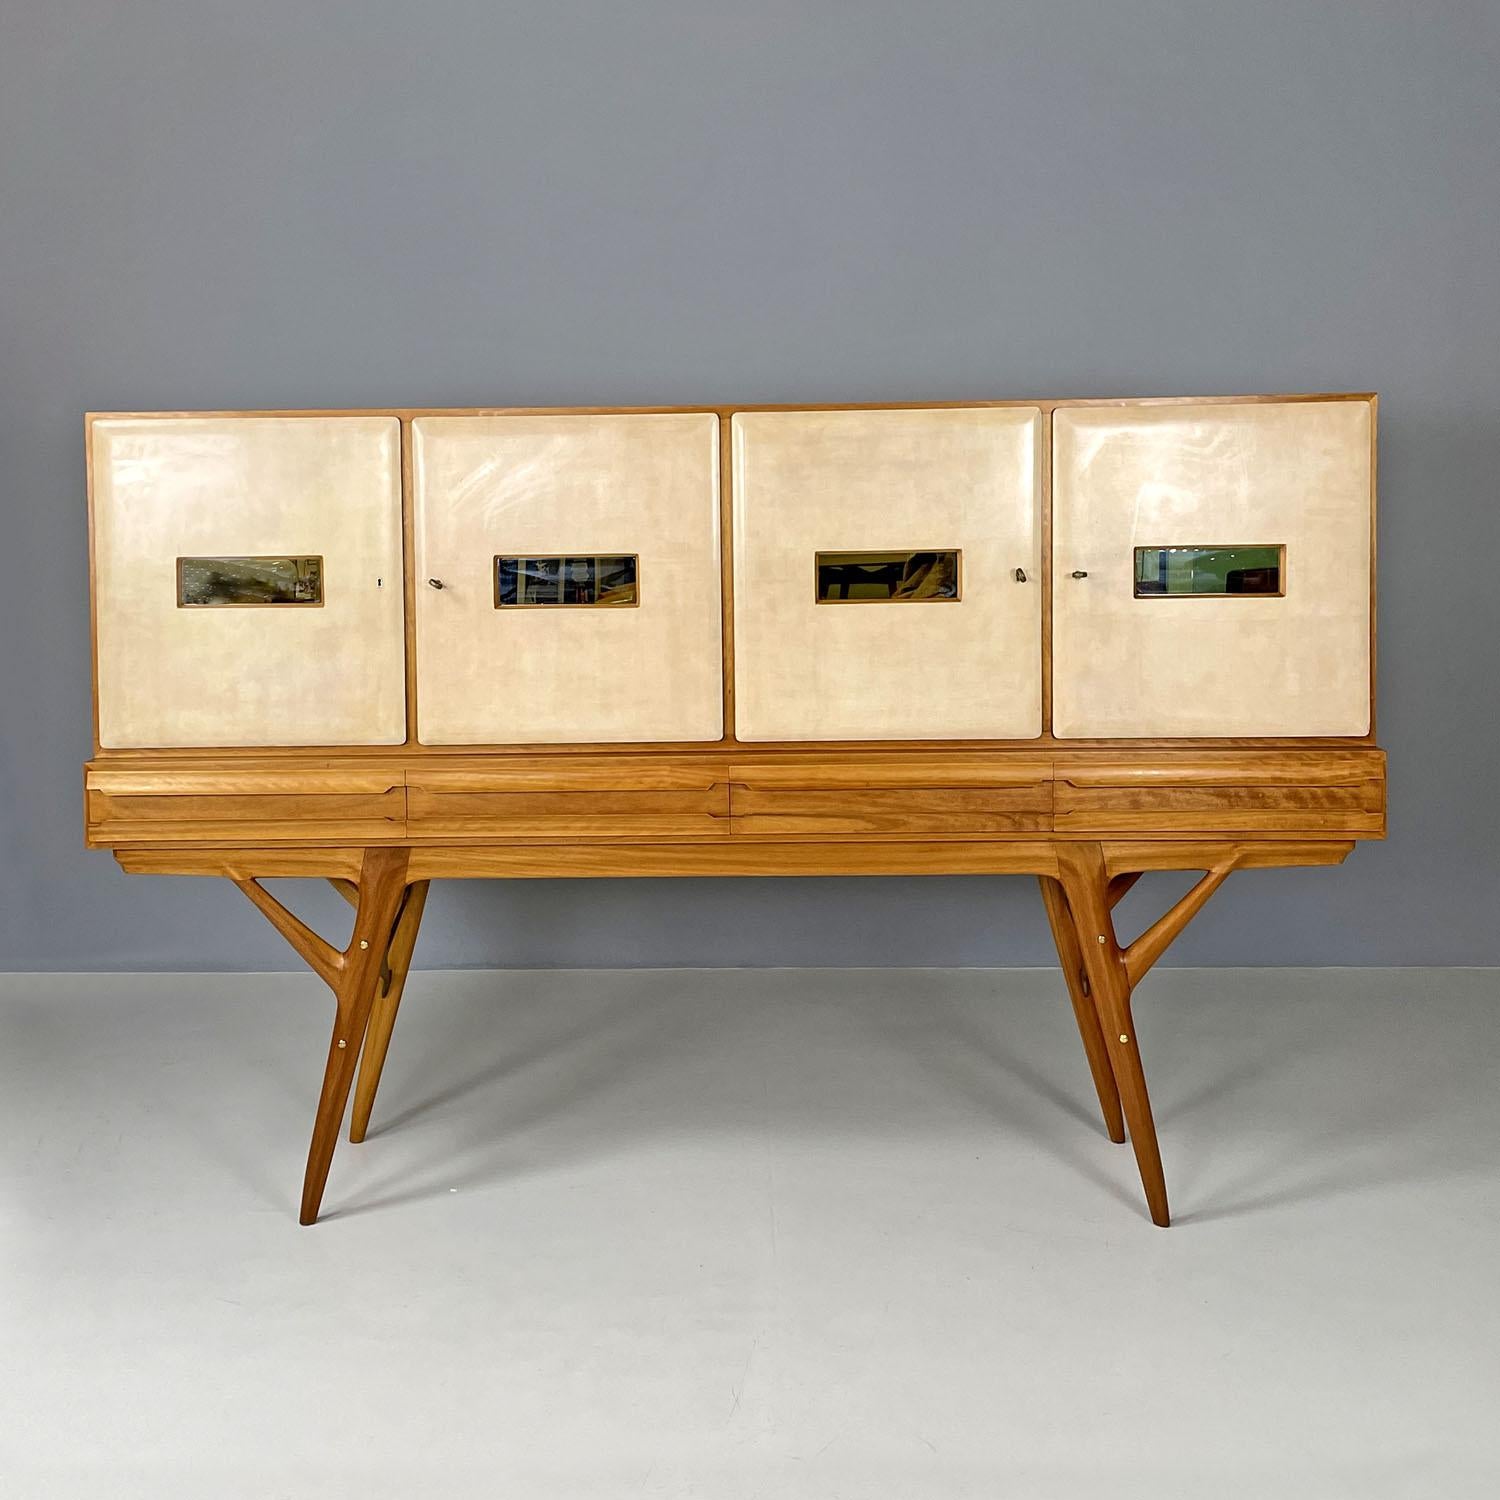 Italian mid-century modern wood and parchment highboard Palazzi dell'Arte, 1950s
High sideboard or highboard with bar compartment. The upper part is made up of four compartments with doors covered in parchment, each door has a recess with a